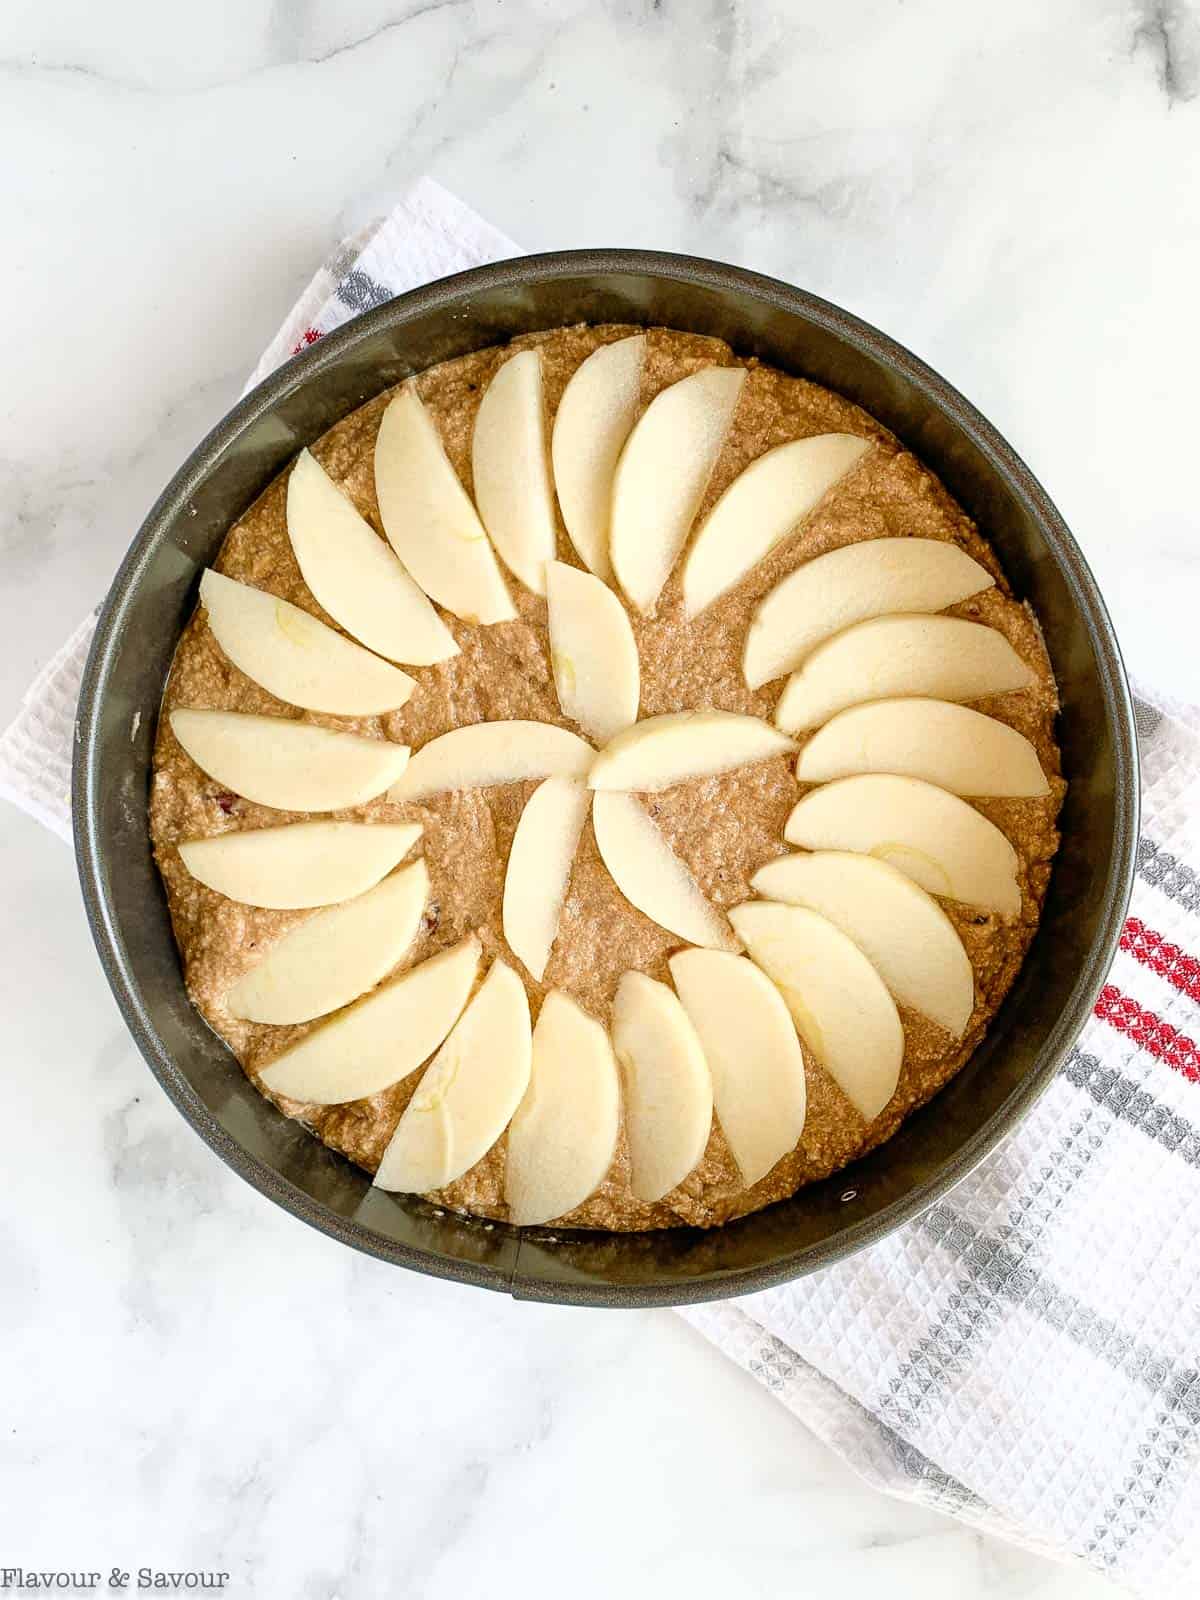 Apple slices arranged in a concentric pattern on top of cake batter in a springform pan